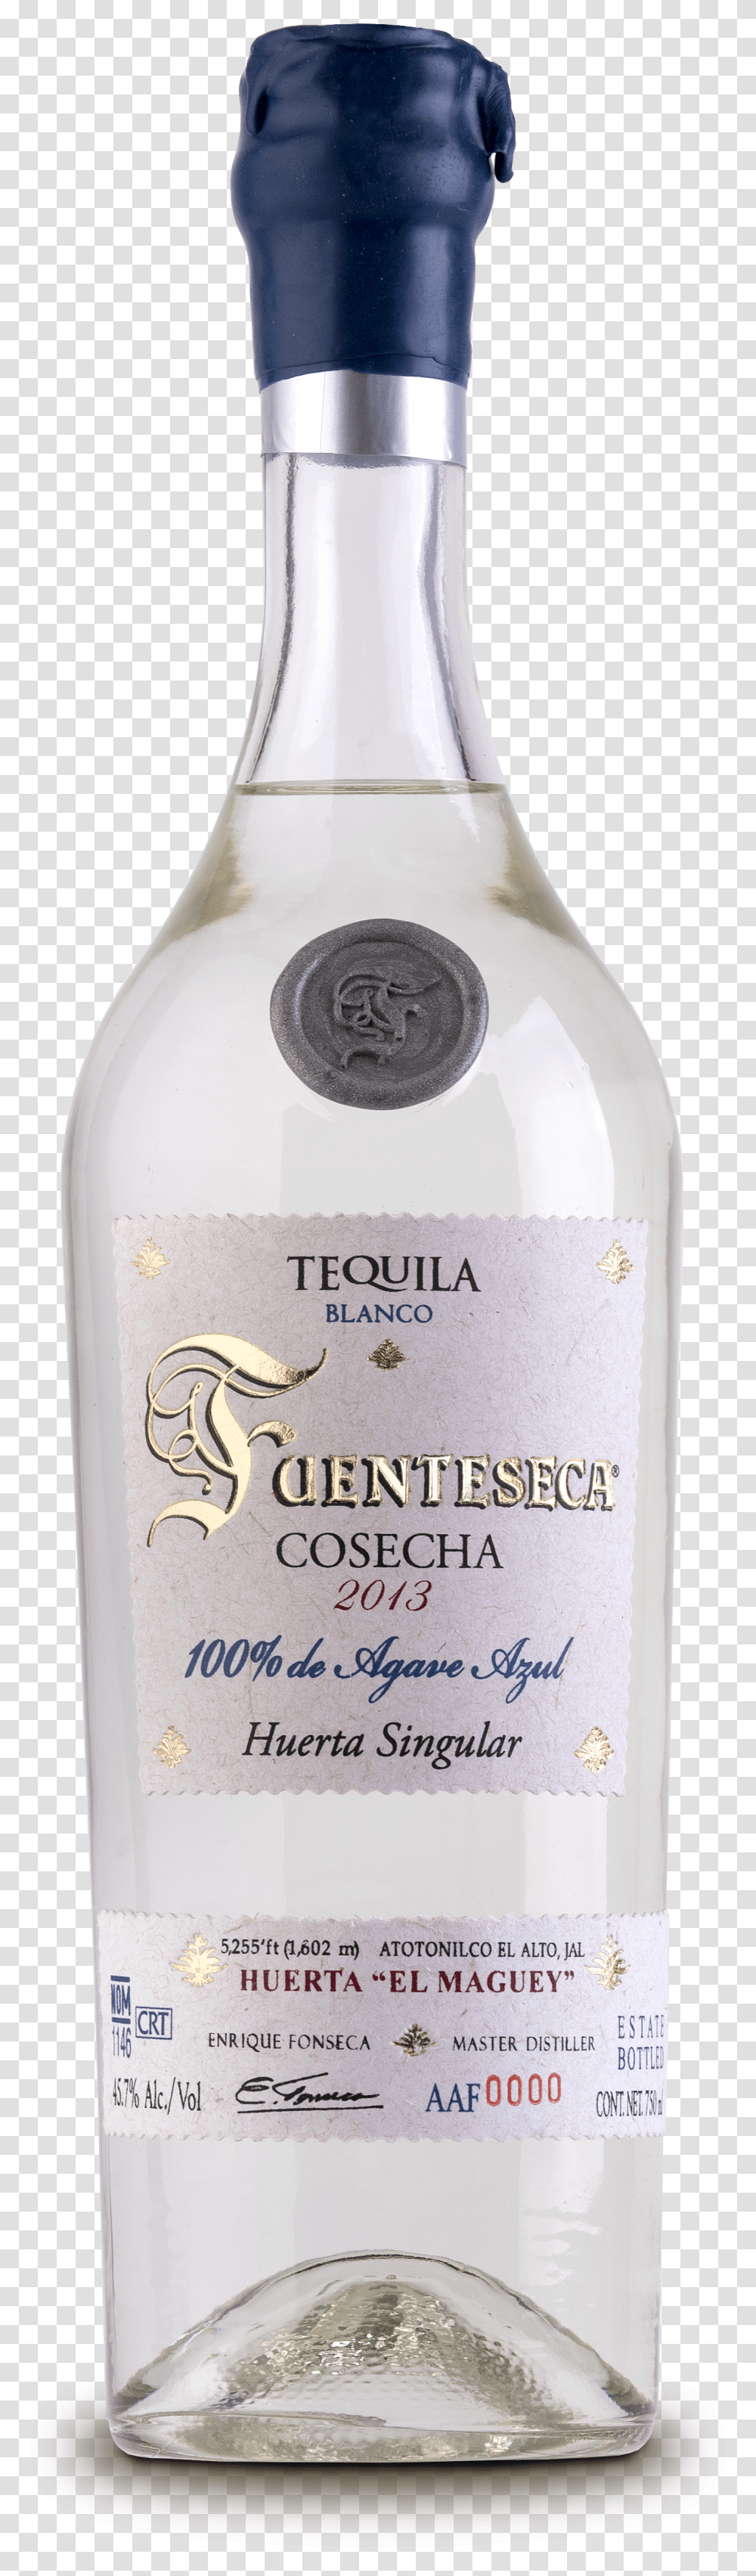 Tequila Fuenteseca Cosecha Blanco Tequila Transparent Png